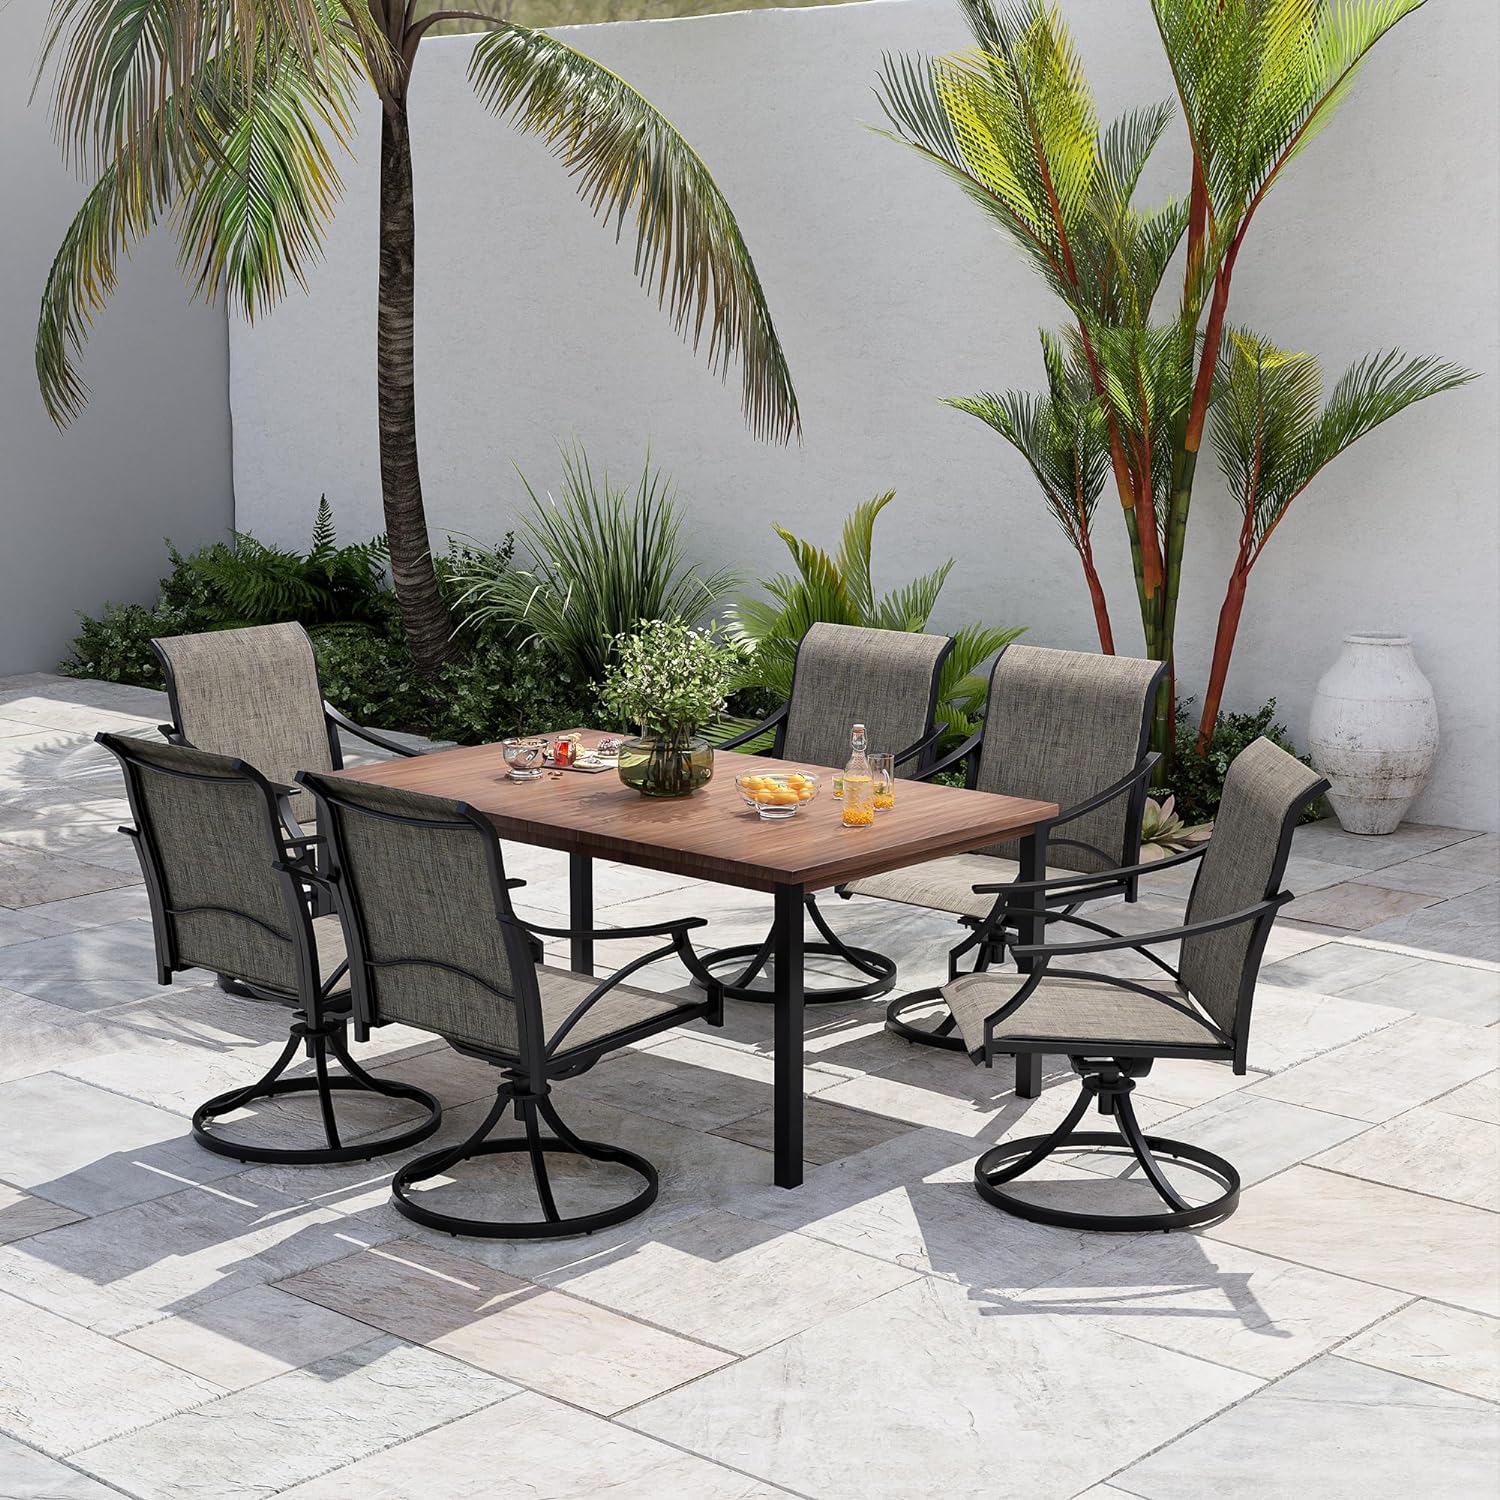 Vicllax 7-Piece Outdoor Dining Set, Rectangle Dining Table for 6 and Patio Dining Chairs